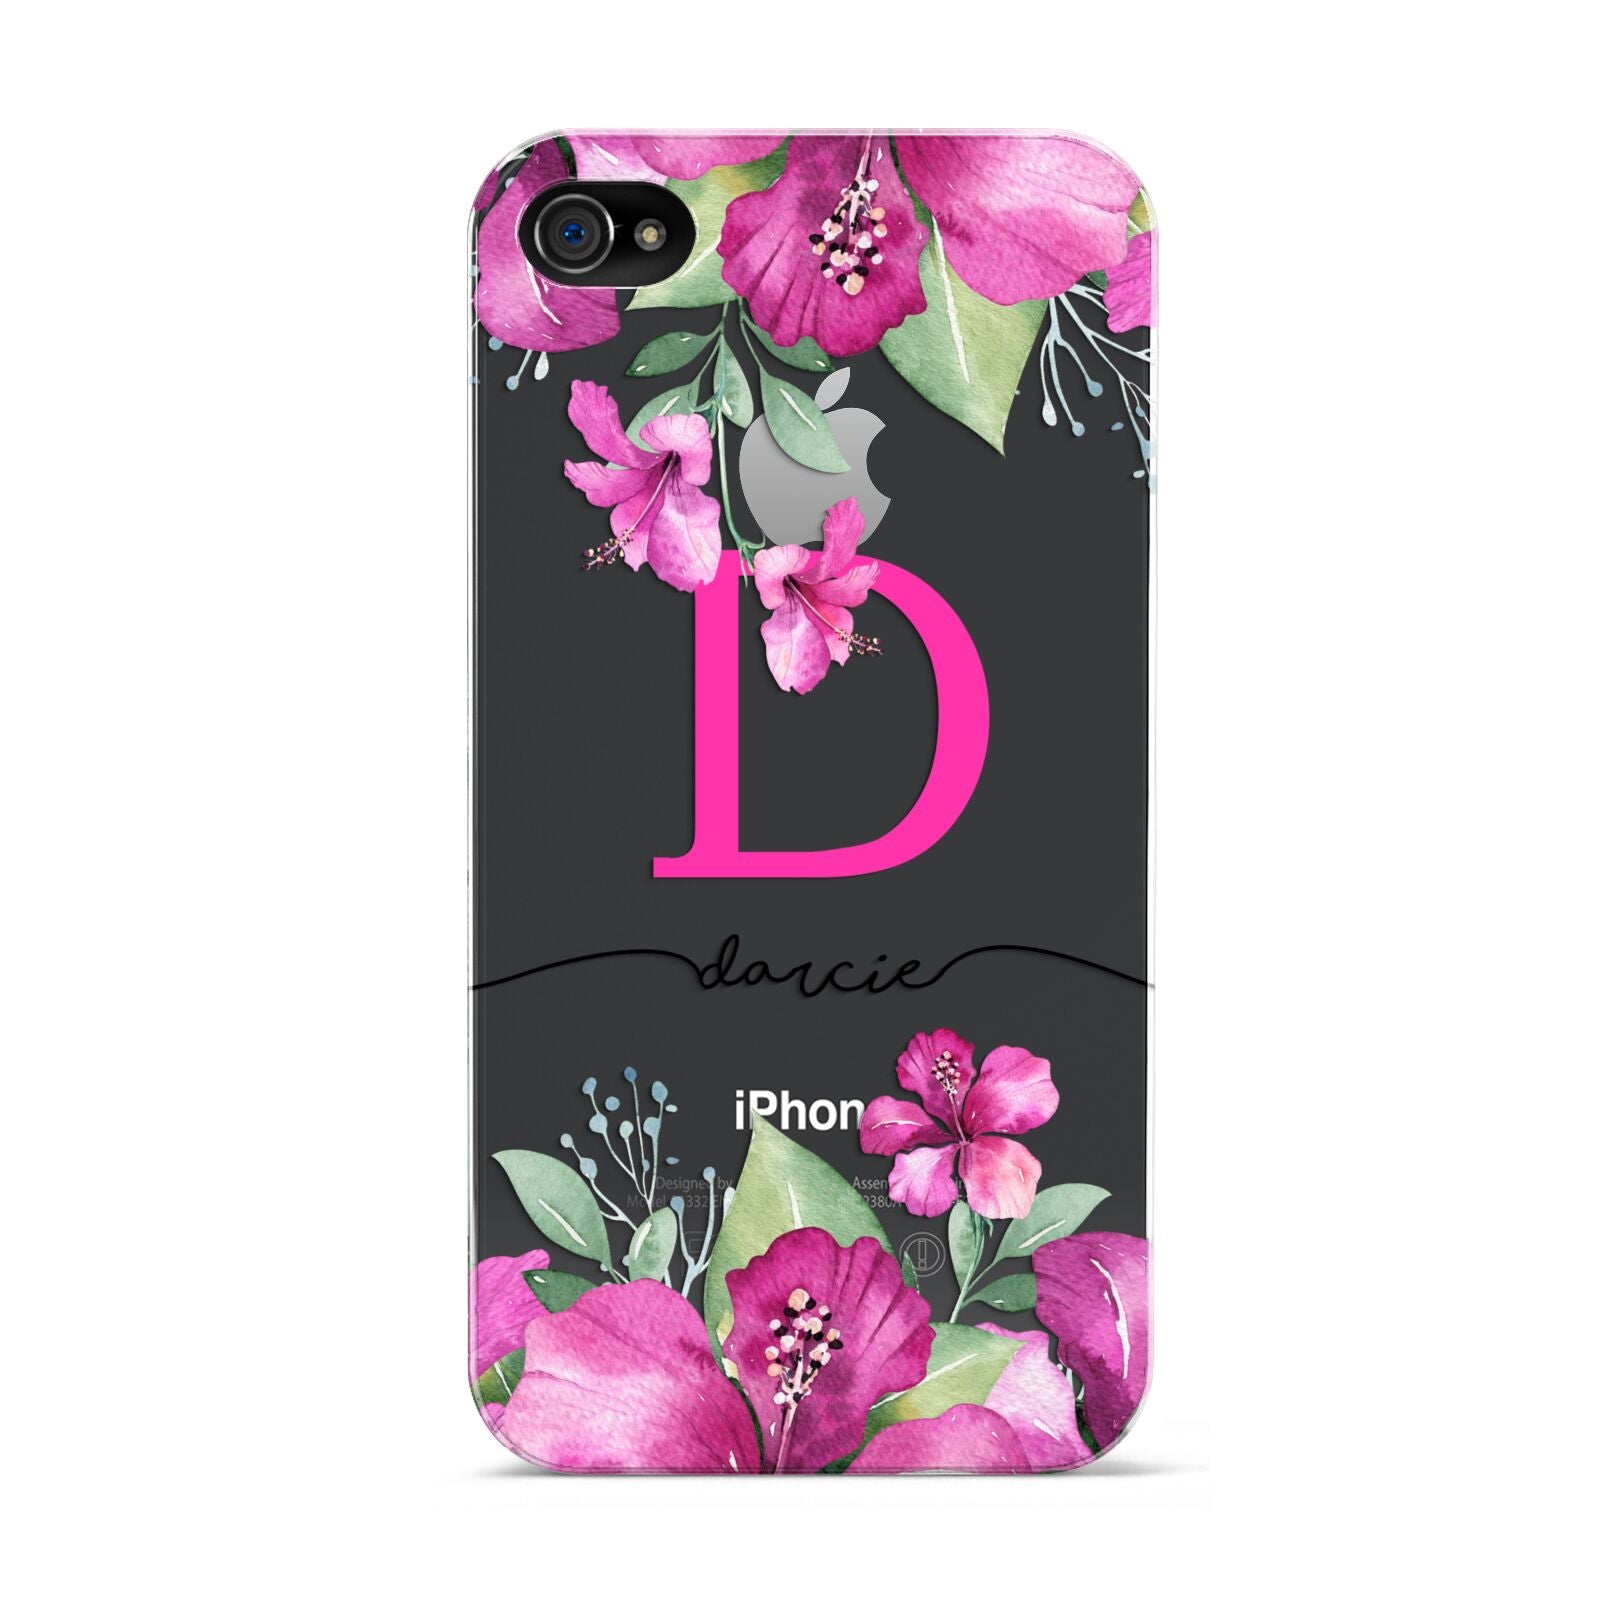 Personalised Pink Lilies Apple iPhone 4s Case